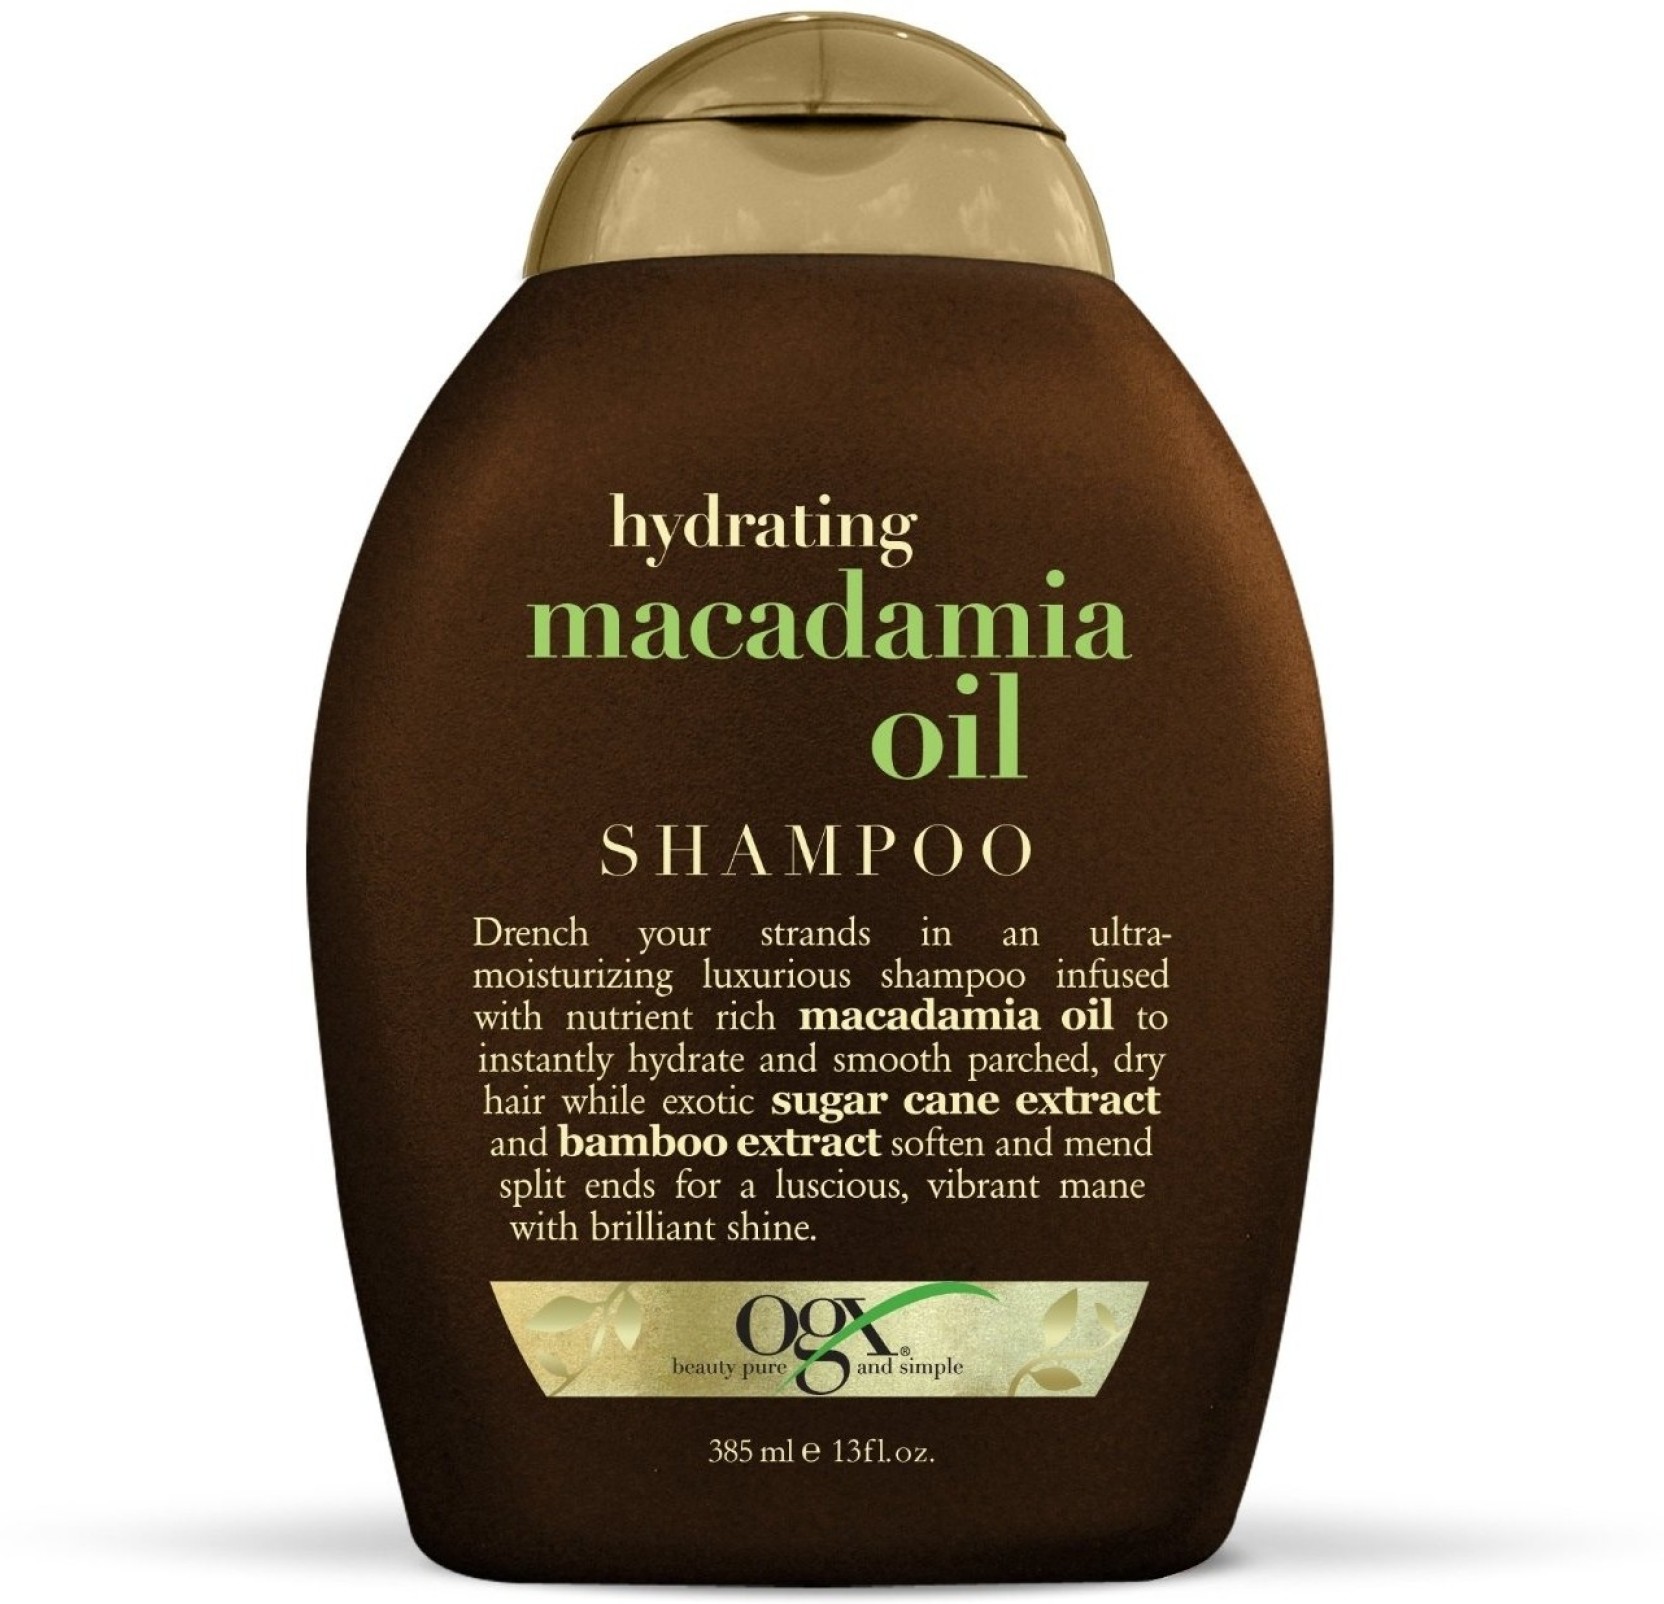 macadamia oil extract hair treatment review